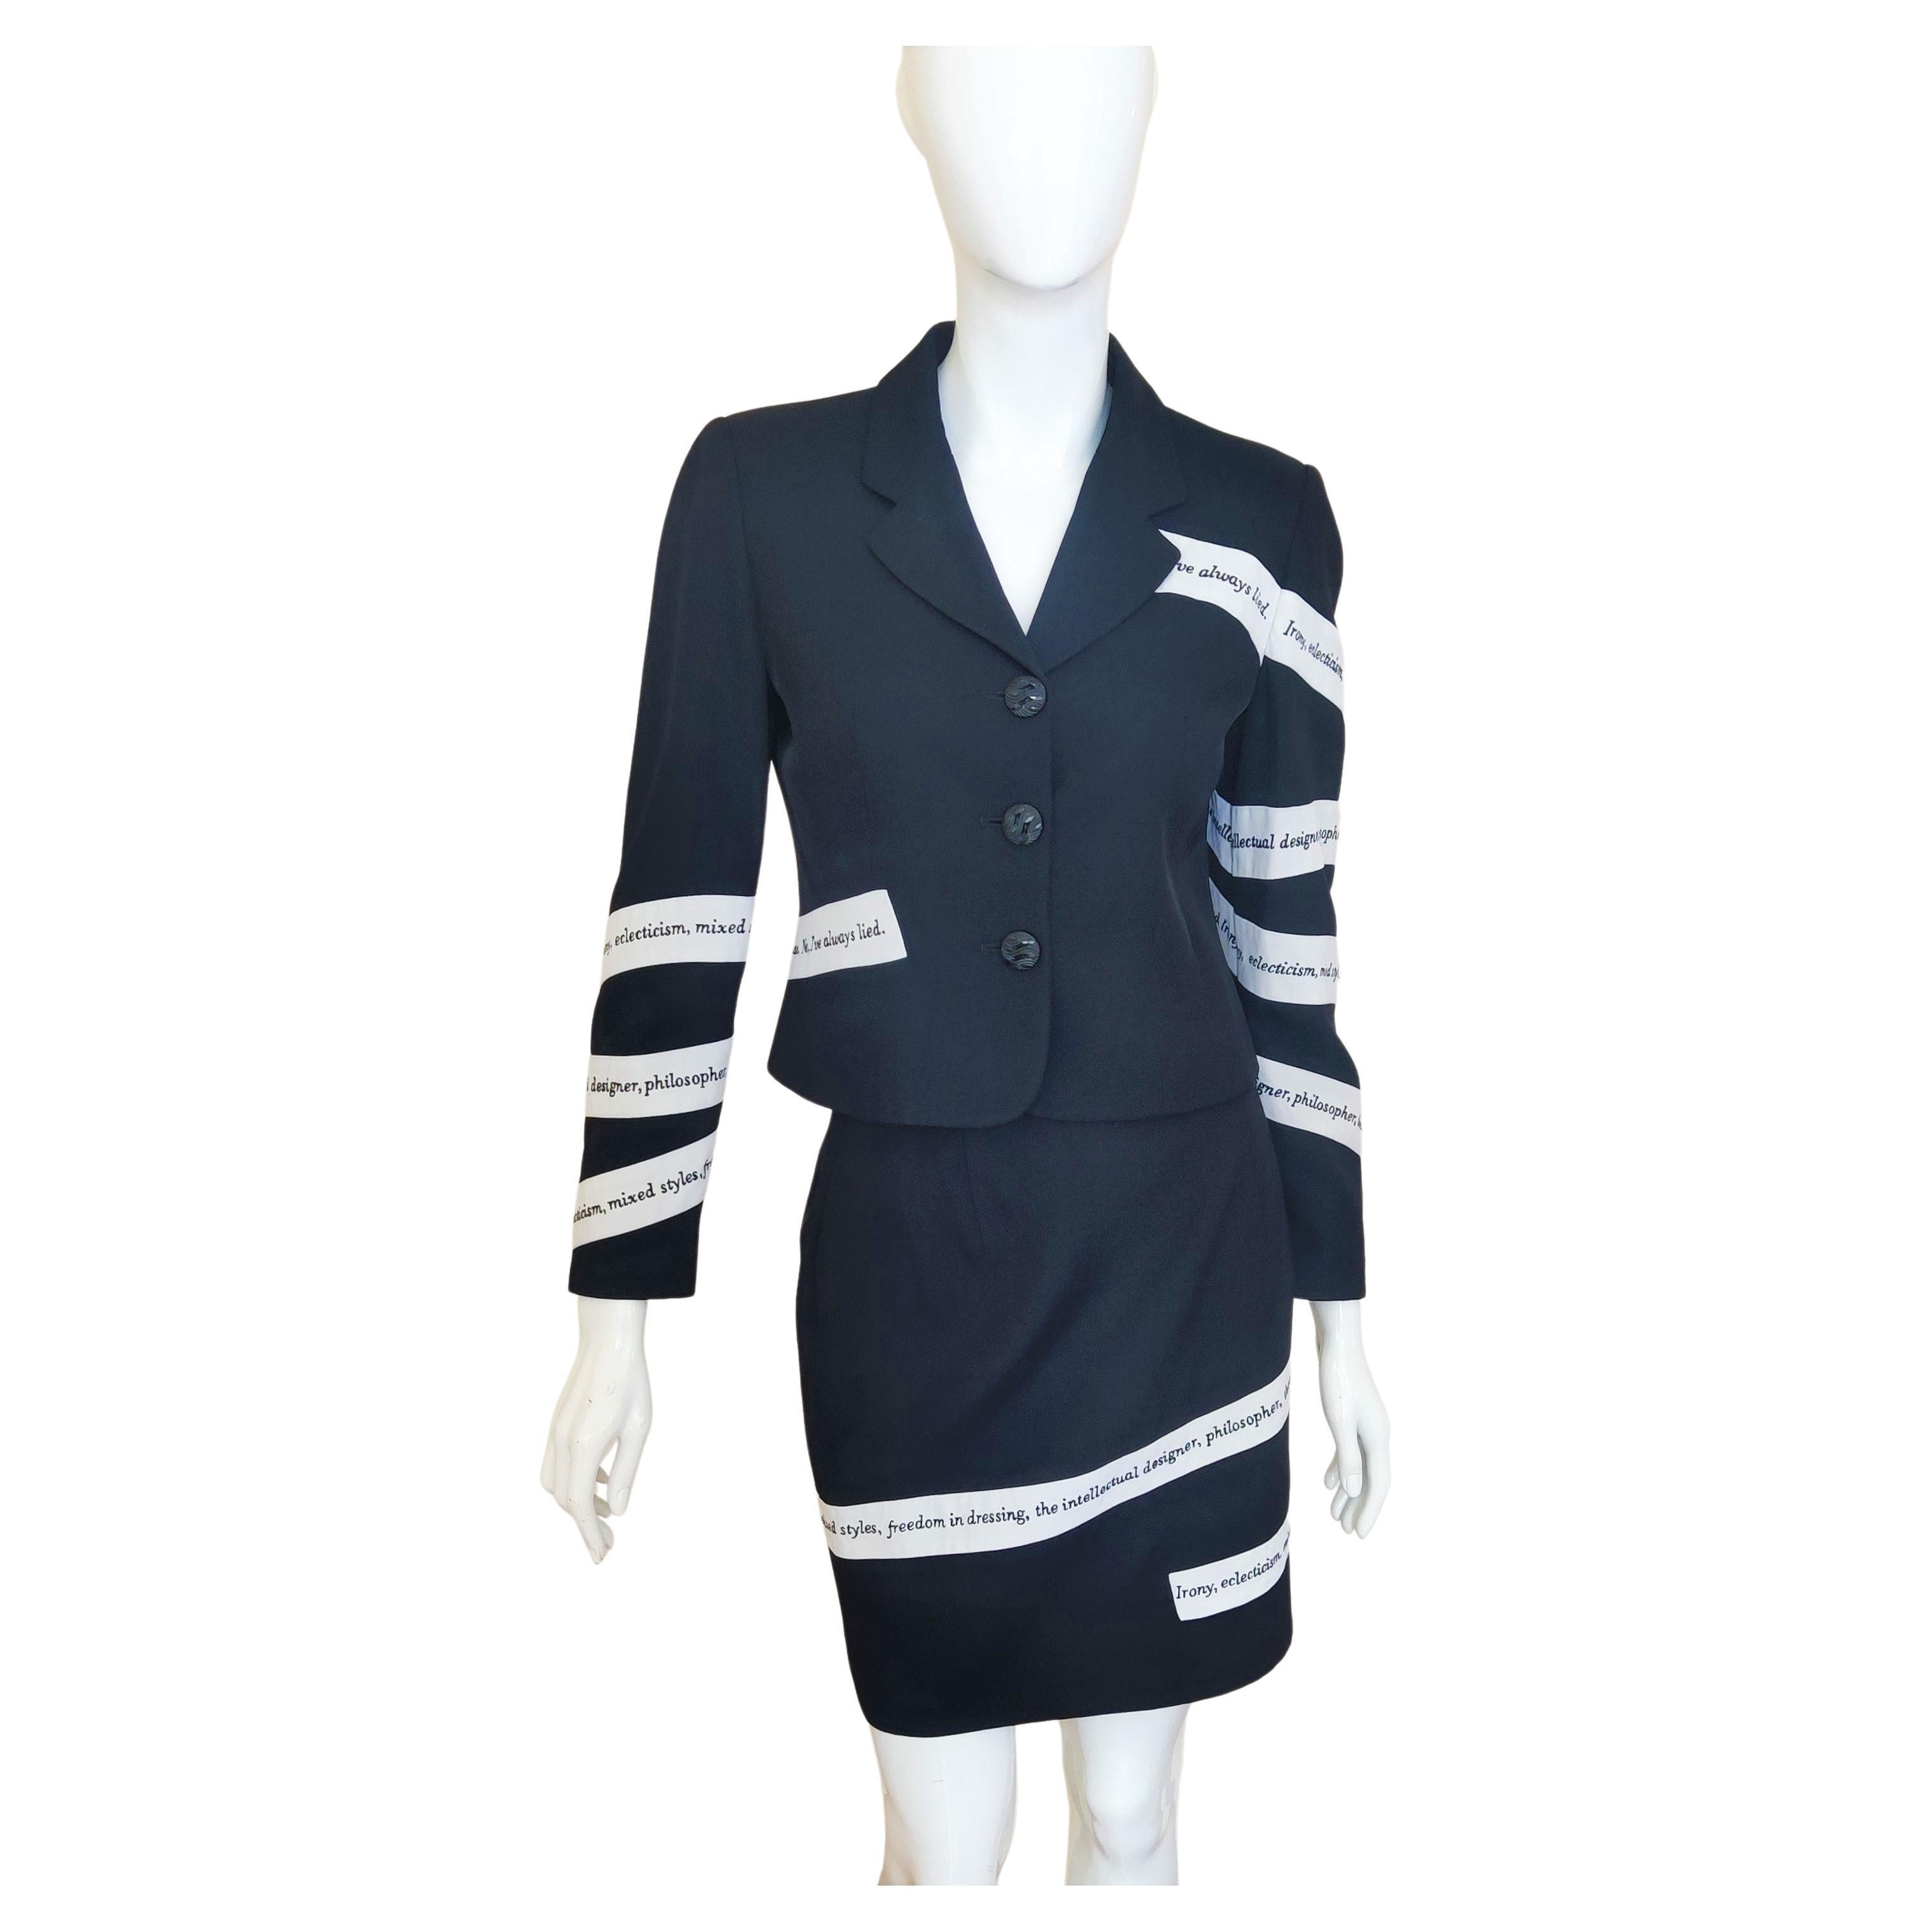 Moschino Cheap and Chic Irony Text Tape Vintage Couture Black White Dress Suit For Sale